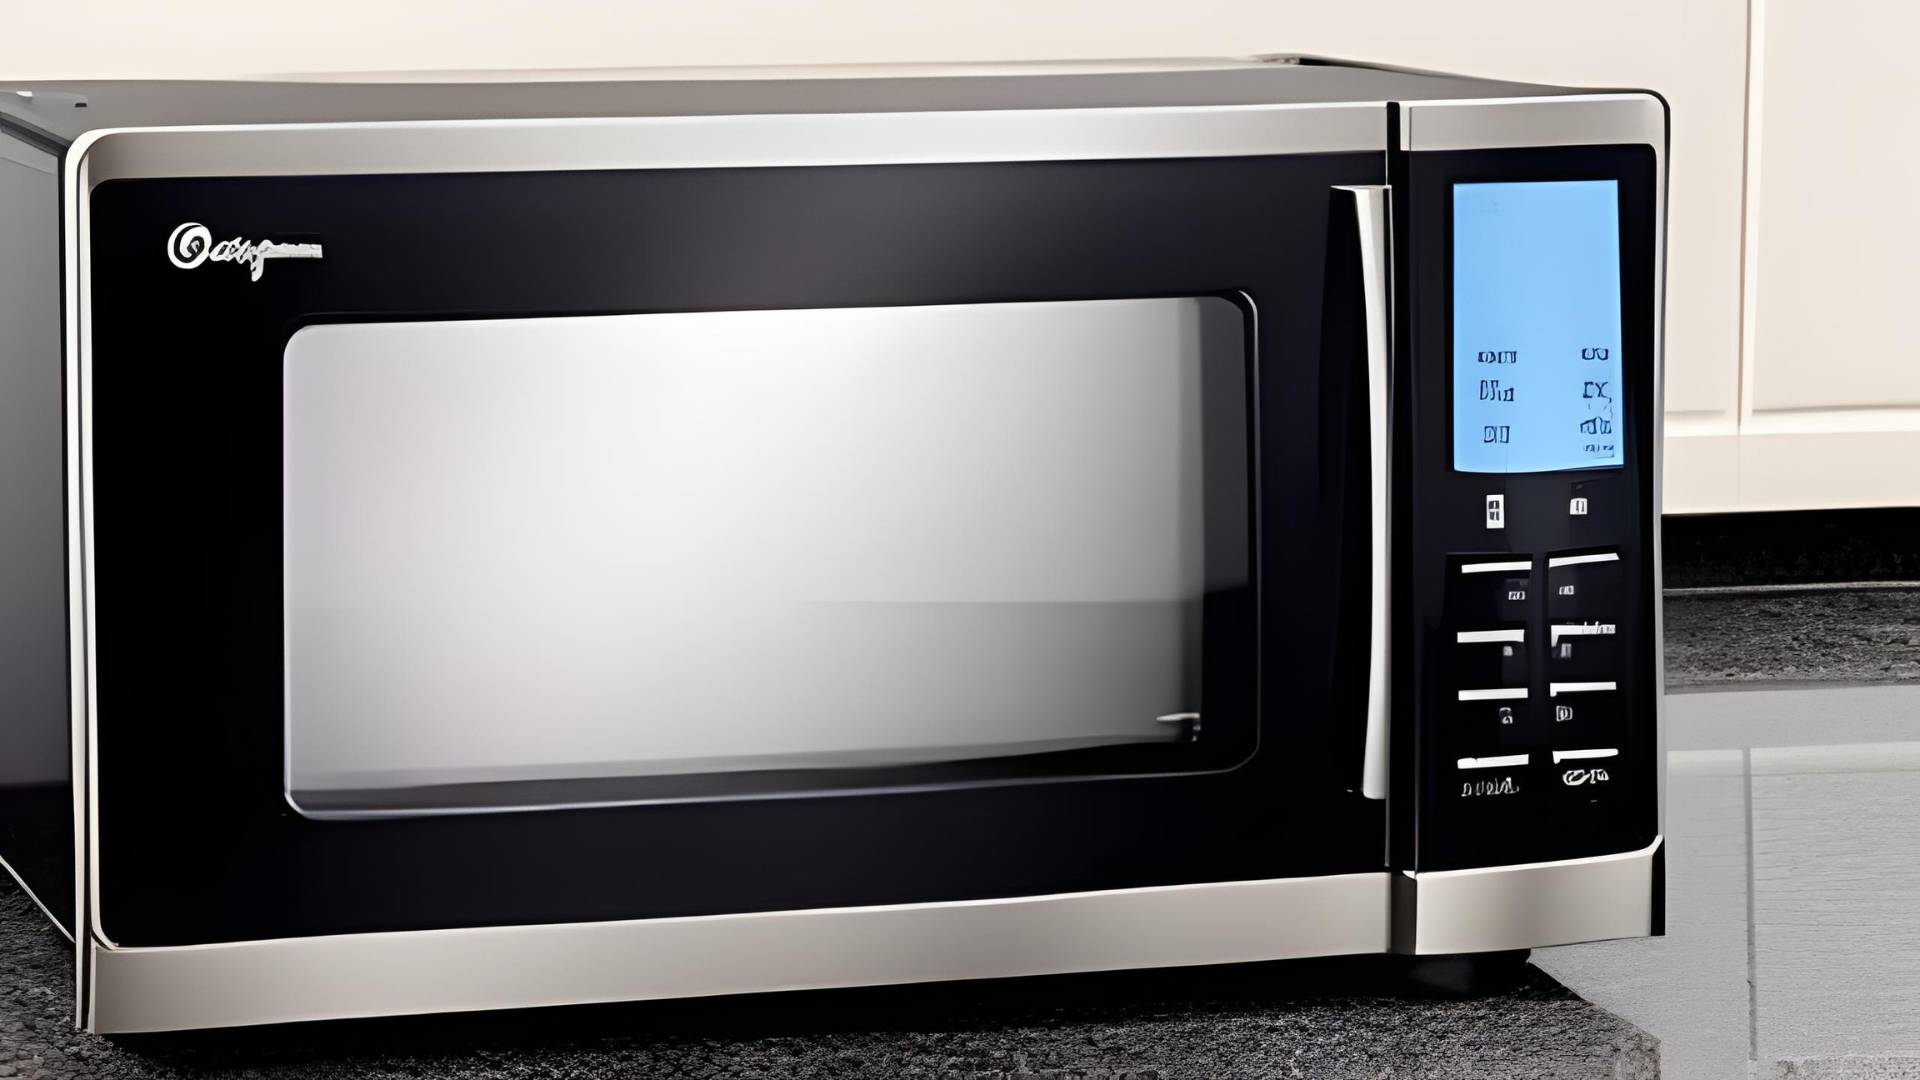 Source Multi Function Auto Cook & Reheat Retro Small Countertop Microwave  Oven With Grill on m.